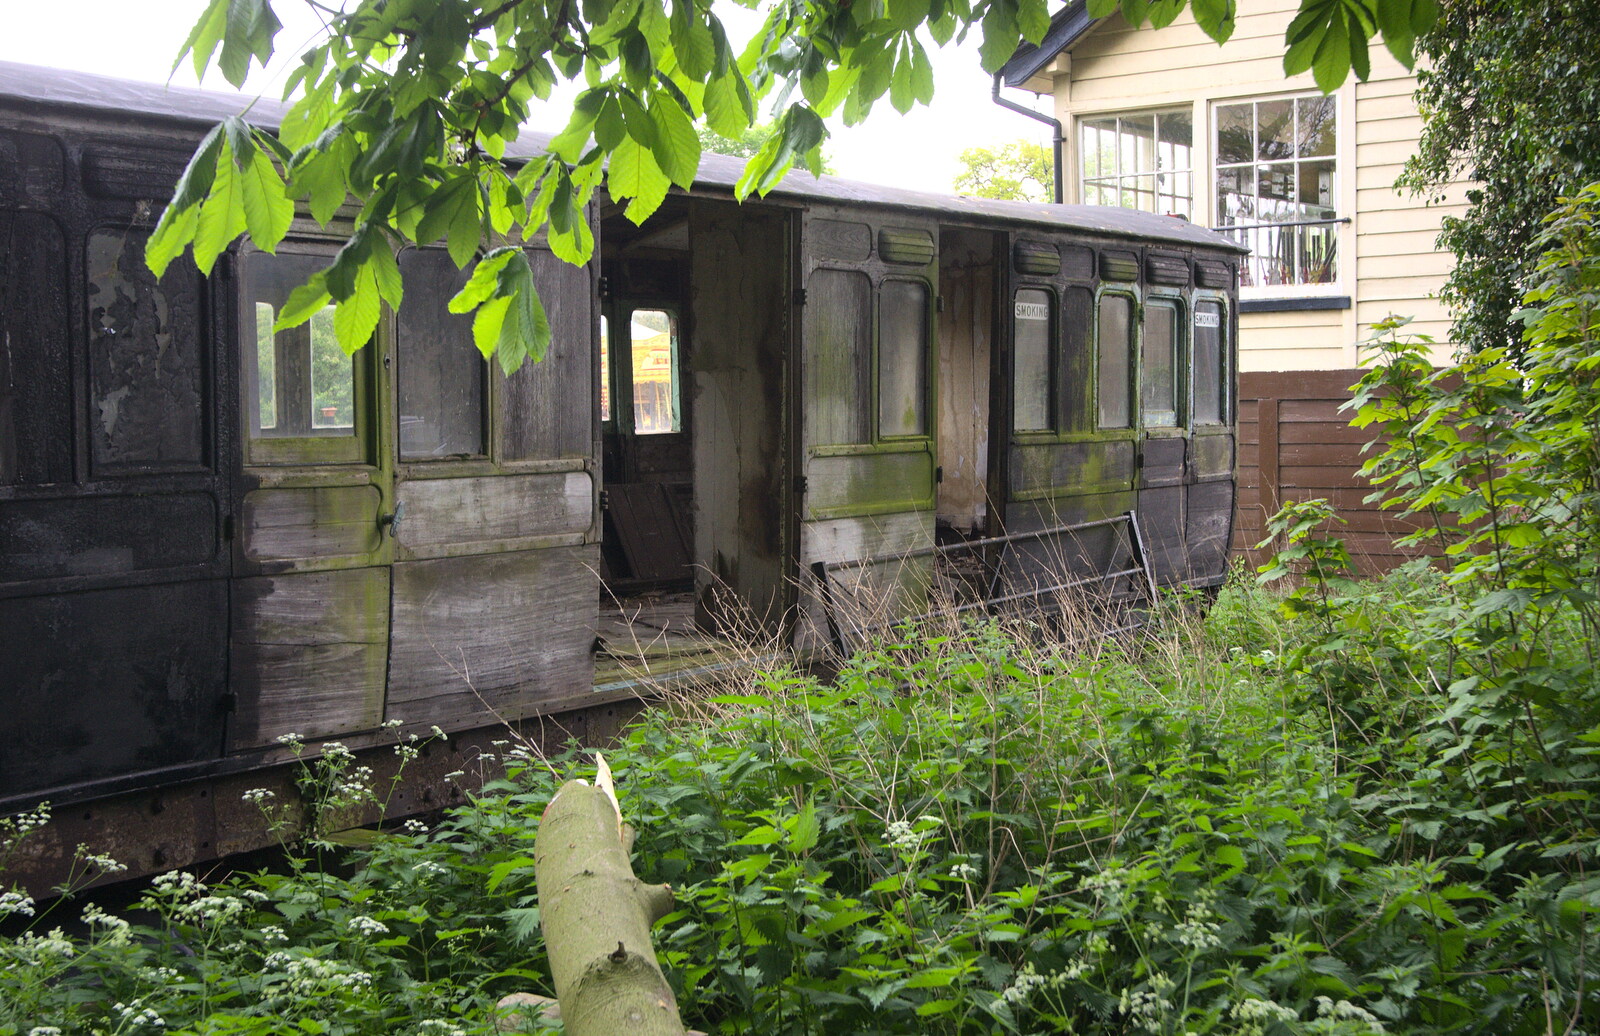 A derelict wooden coach from A Day at Bressingham Steam and Gardens, Diss, Norfolk - 18th May 2013